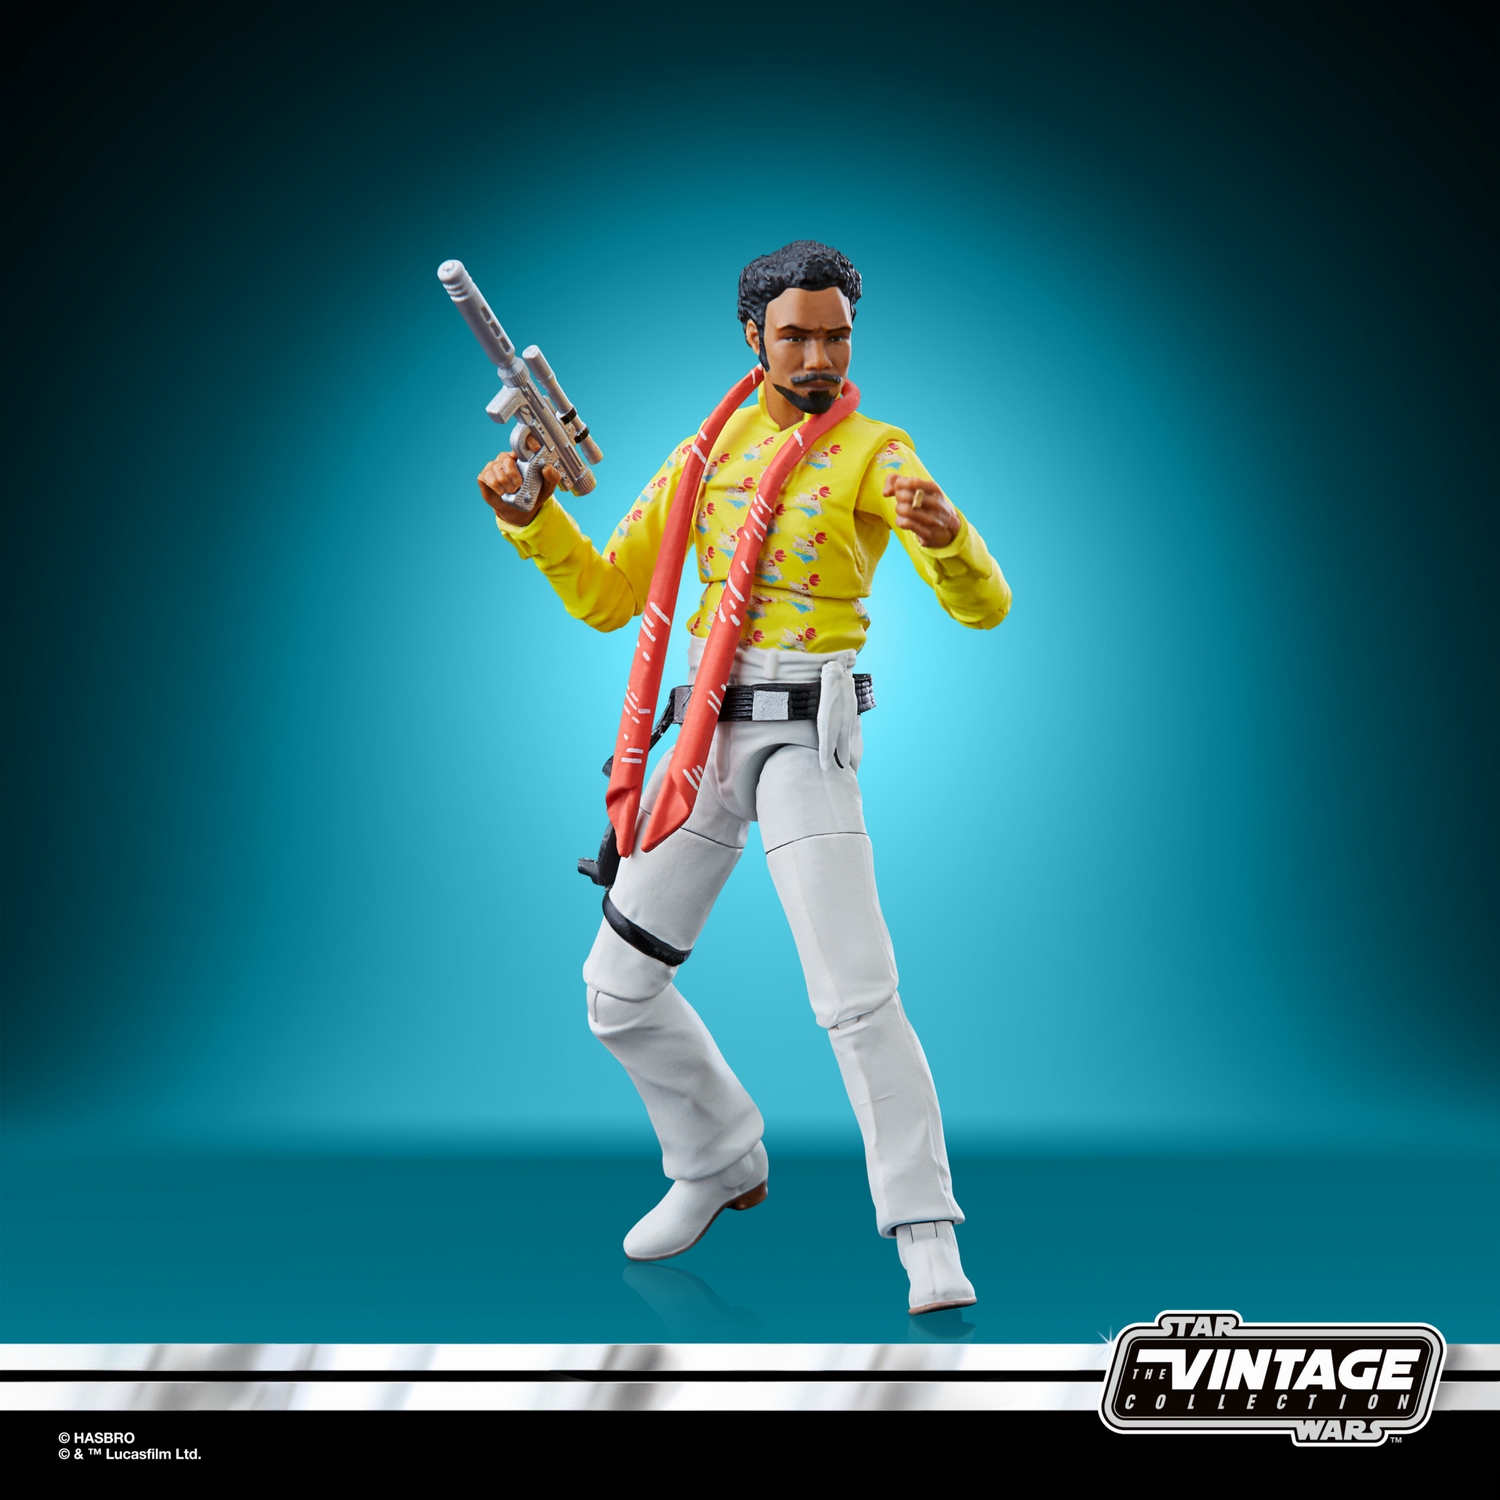 STAR WARS THE VINTAGE COLLECTION 3.75-INCH GAMING GREATS LANDO CALRISSIAN Figure 7.jpg